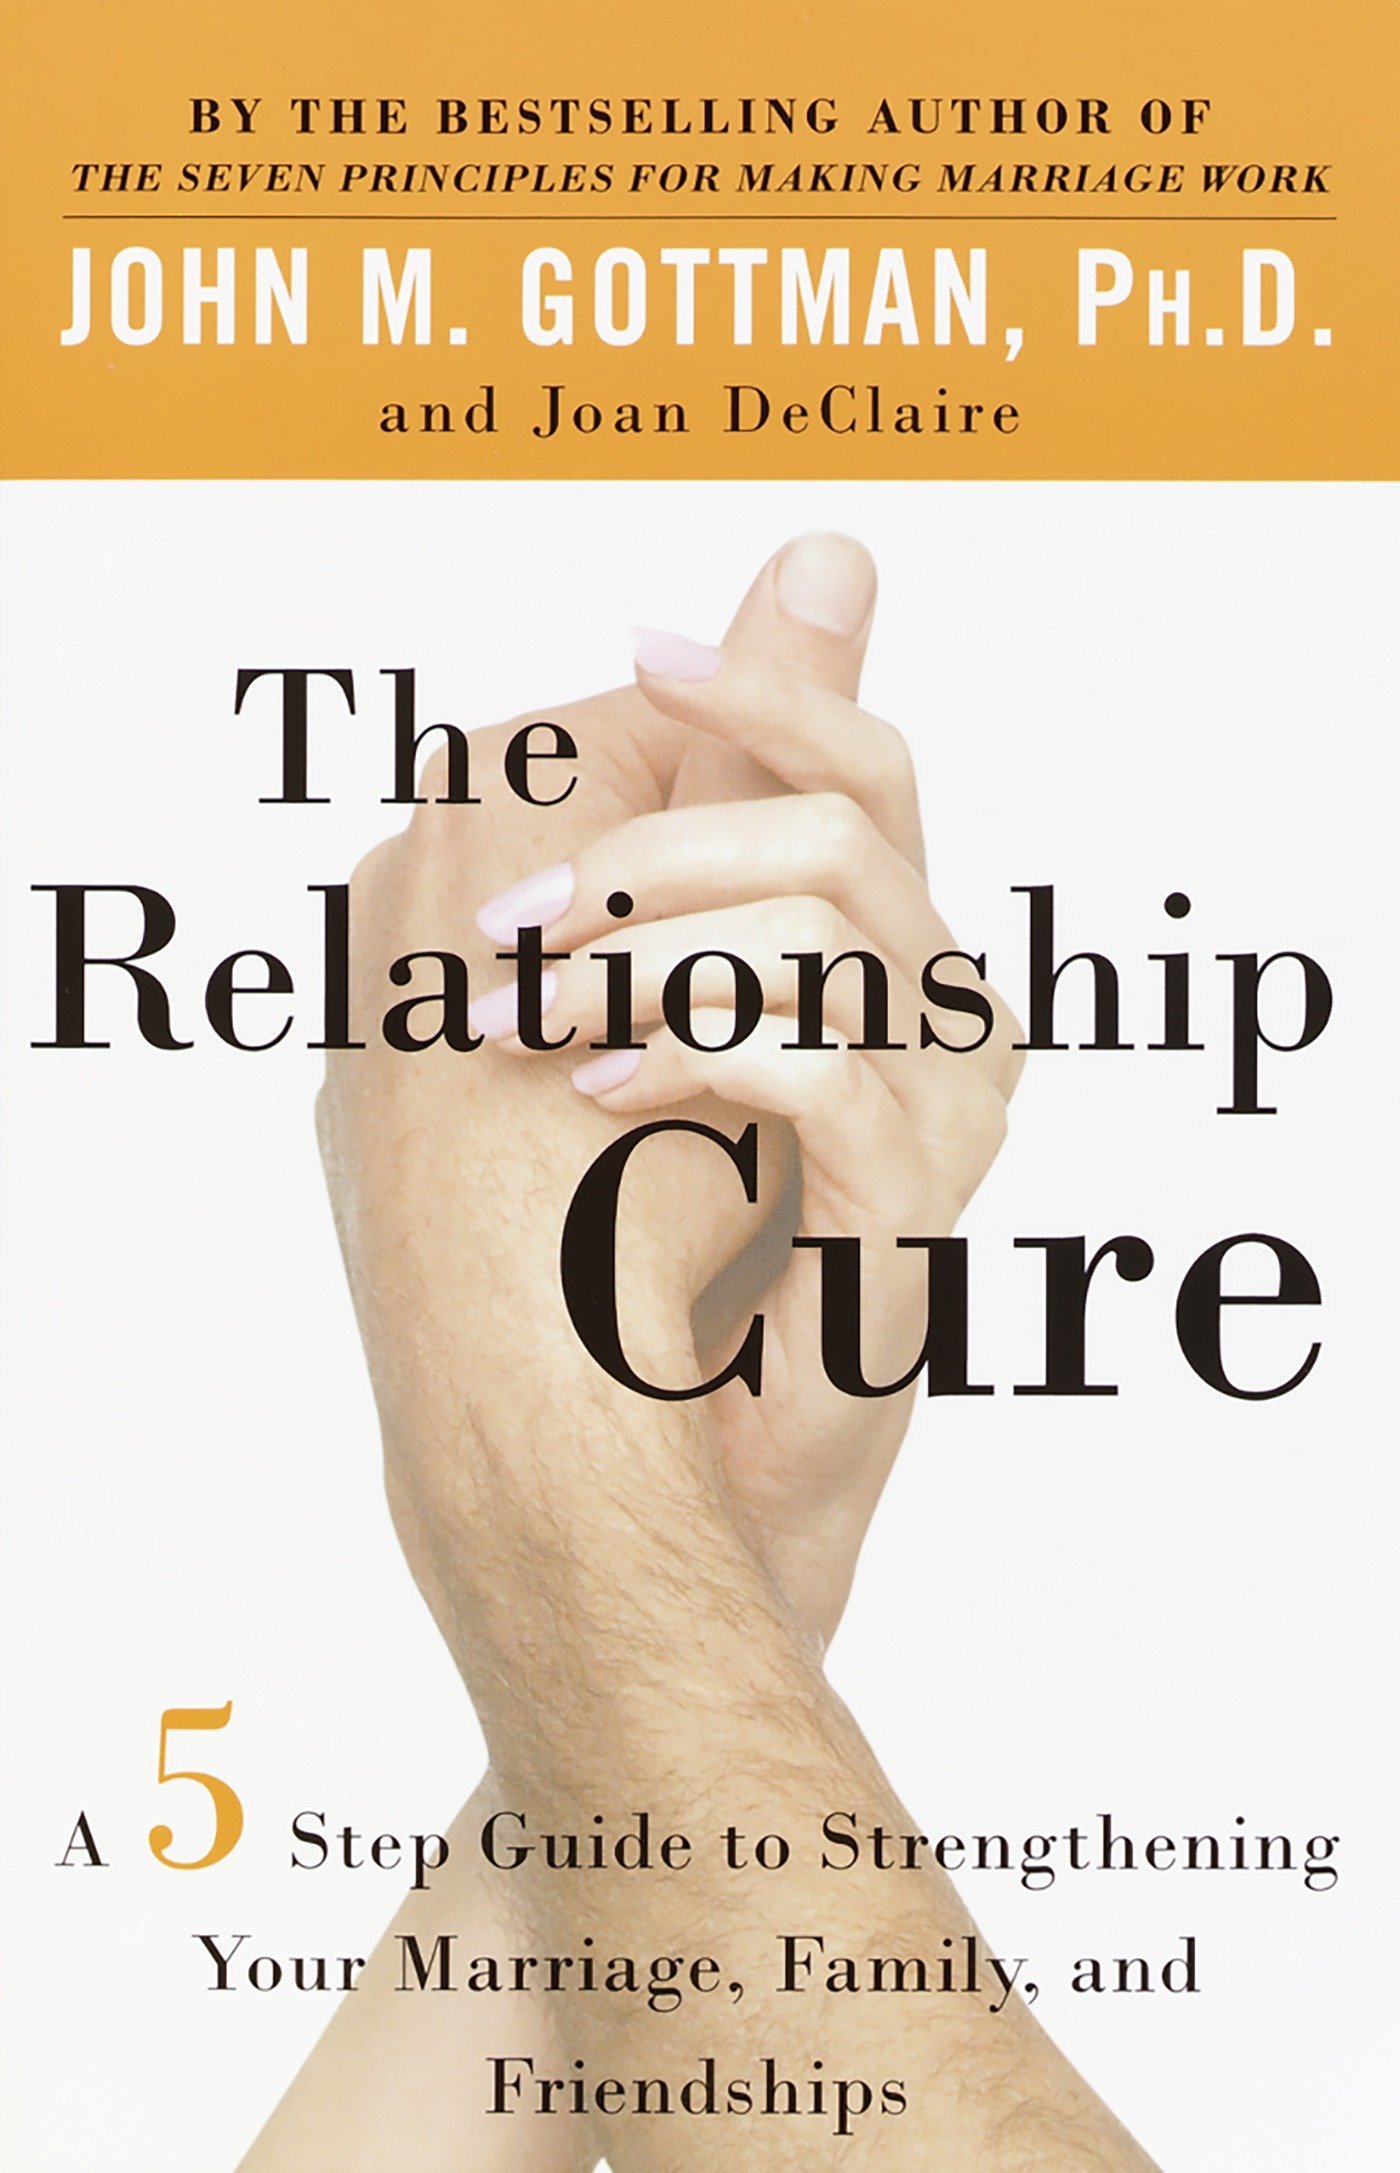 The Relationship Cure: A 5 Step Guide to Strengthening Your Marriage, Family, and Friendships – Gottman (2002)